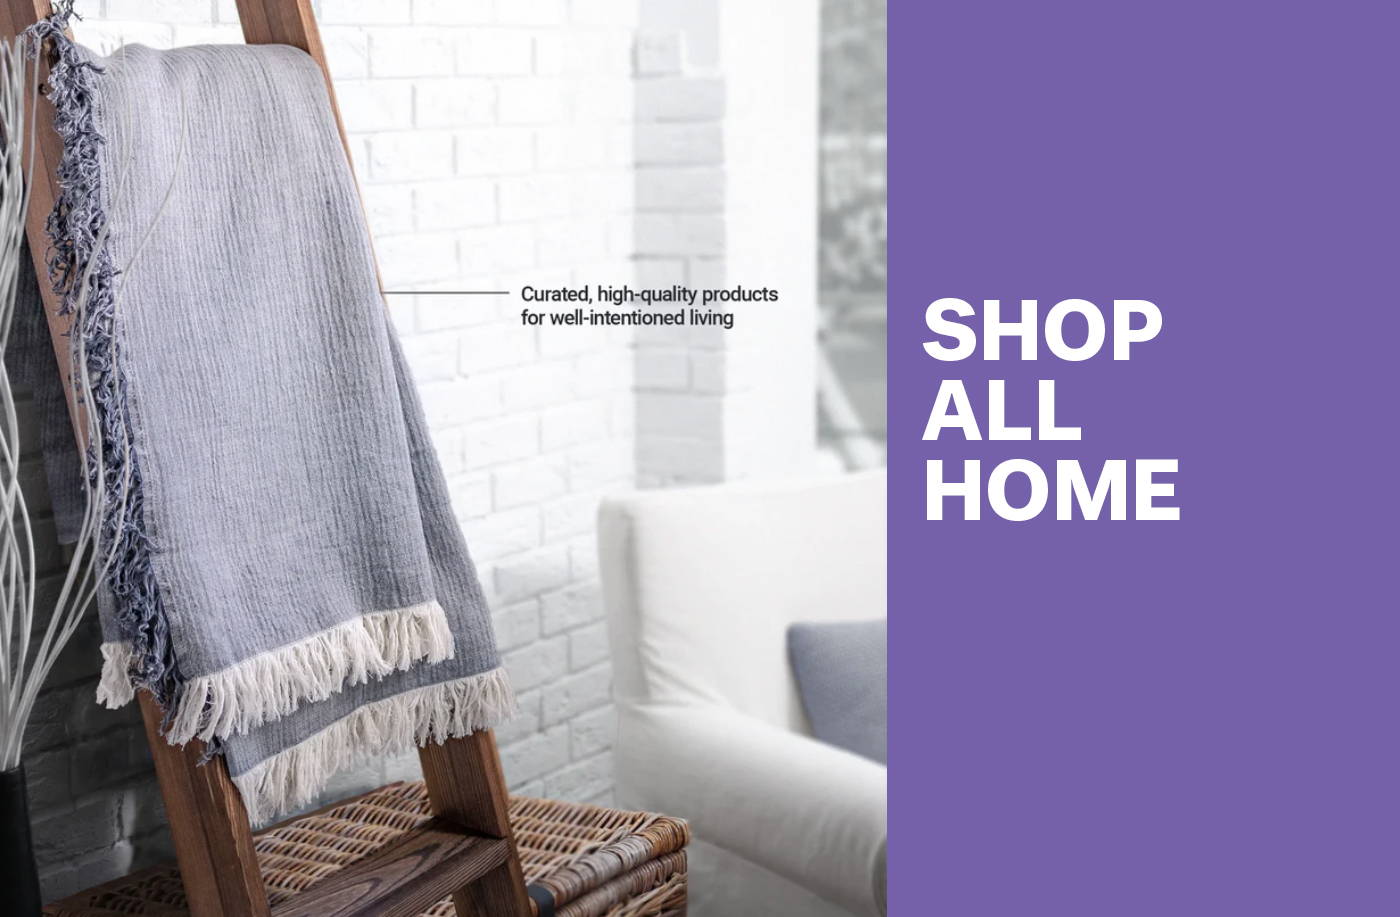 Shop all home.